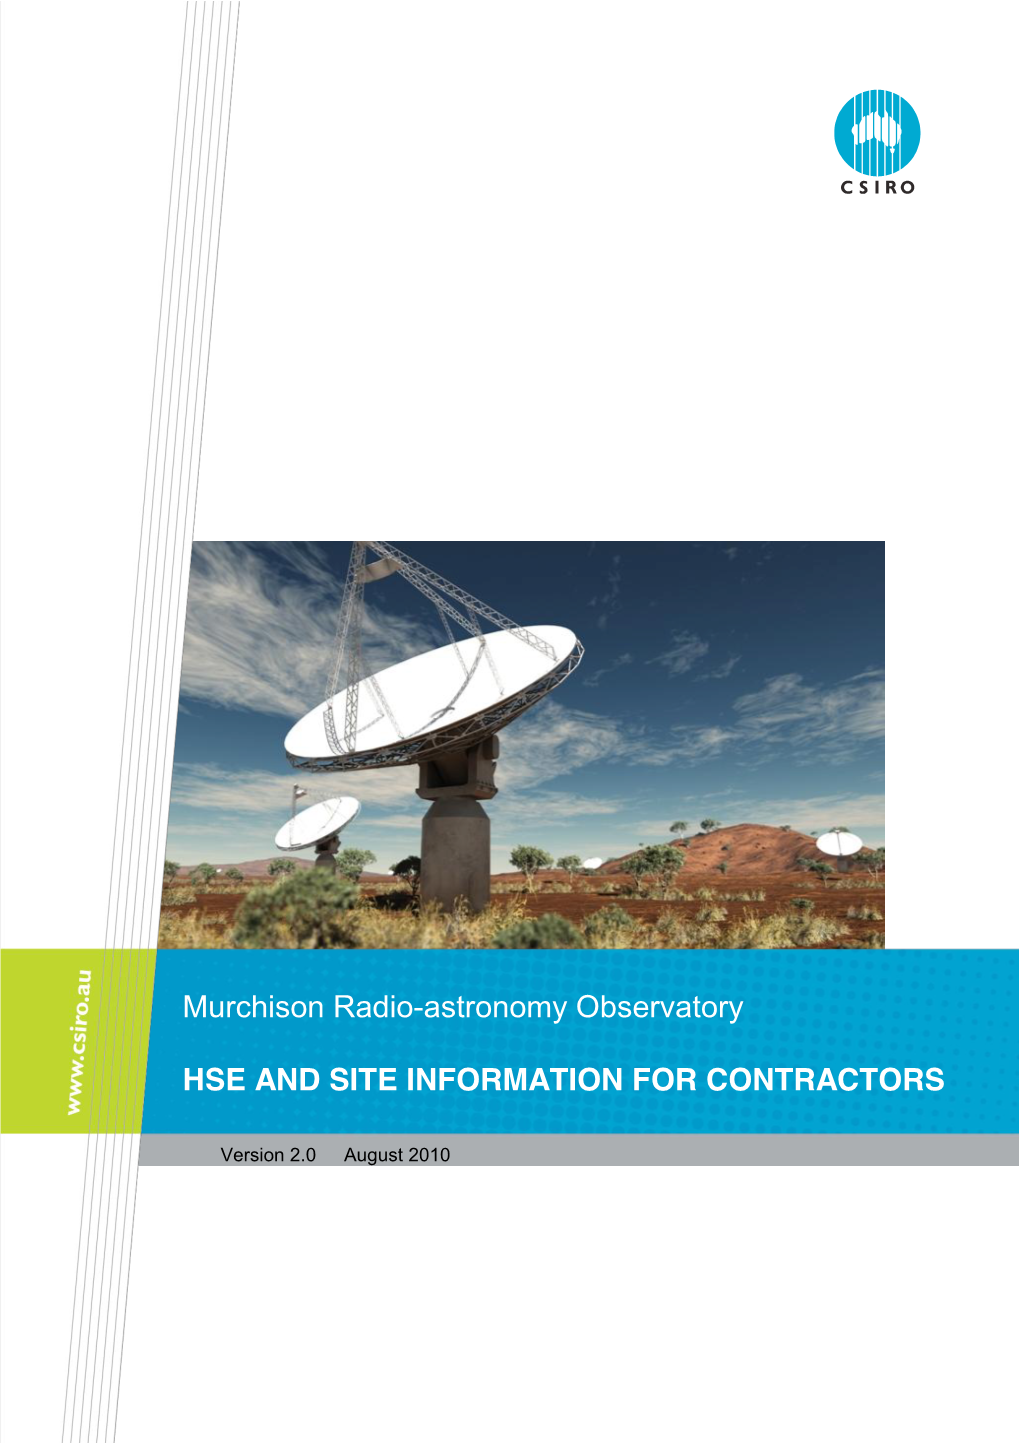 Murchison Radio-Astronomy Observatory HSE and SITE INFORMATION for CONTRACTORS